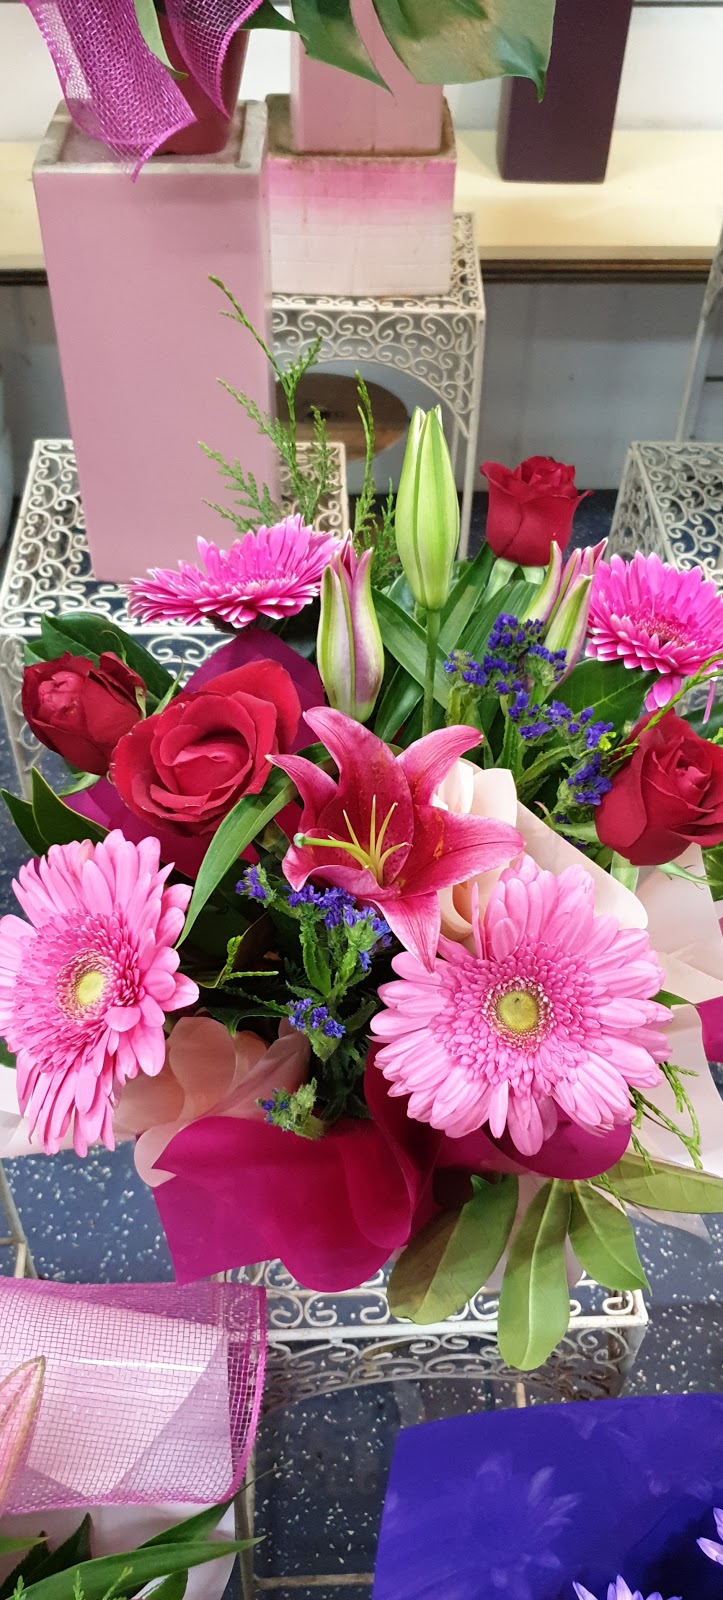 Wishez Flowers & Gifts | The Stables Shopping Centre Childs Road Shop 17, Mill Park VIC 3082, Australia | Phone: (03) 9436 9500